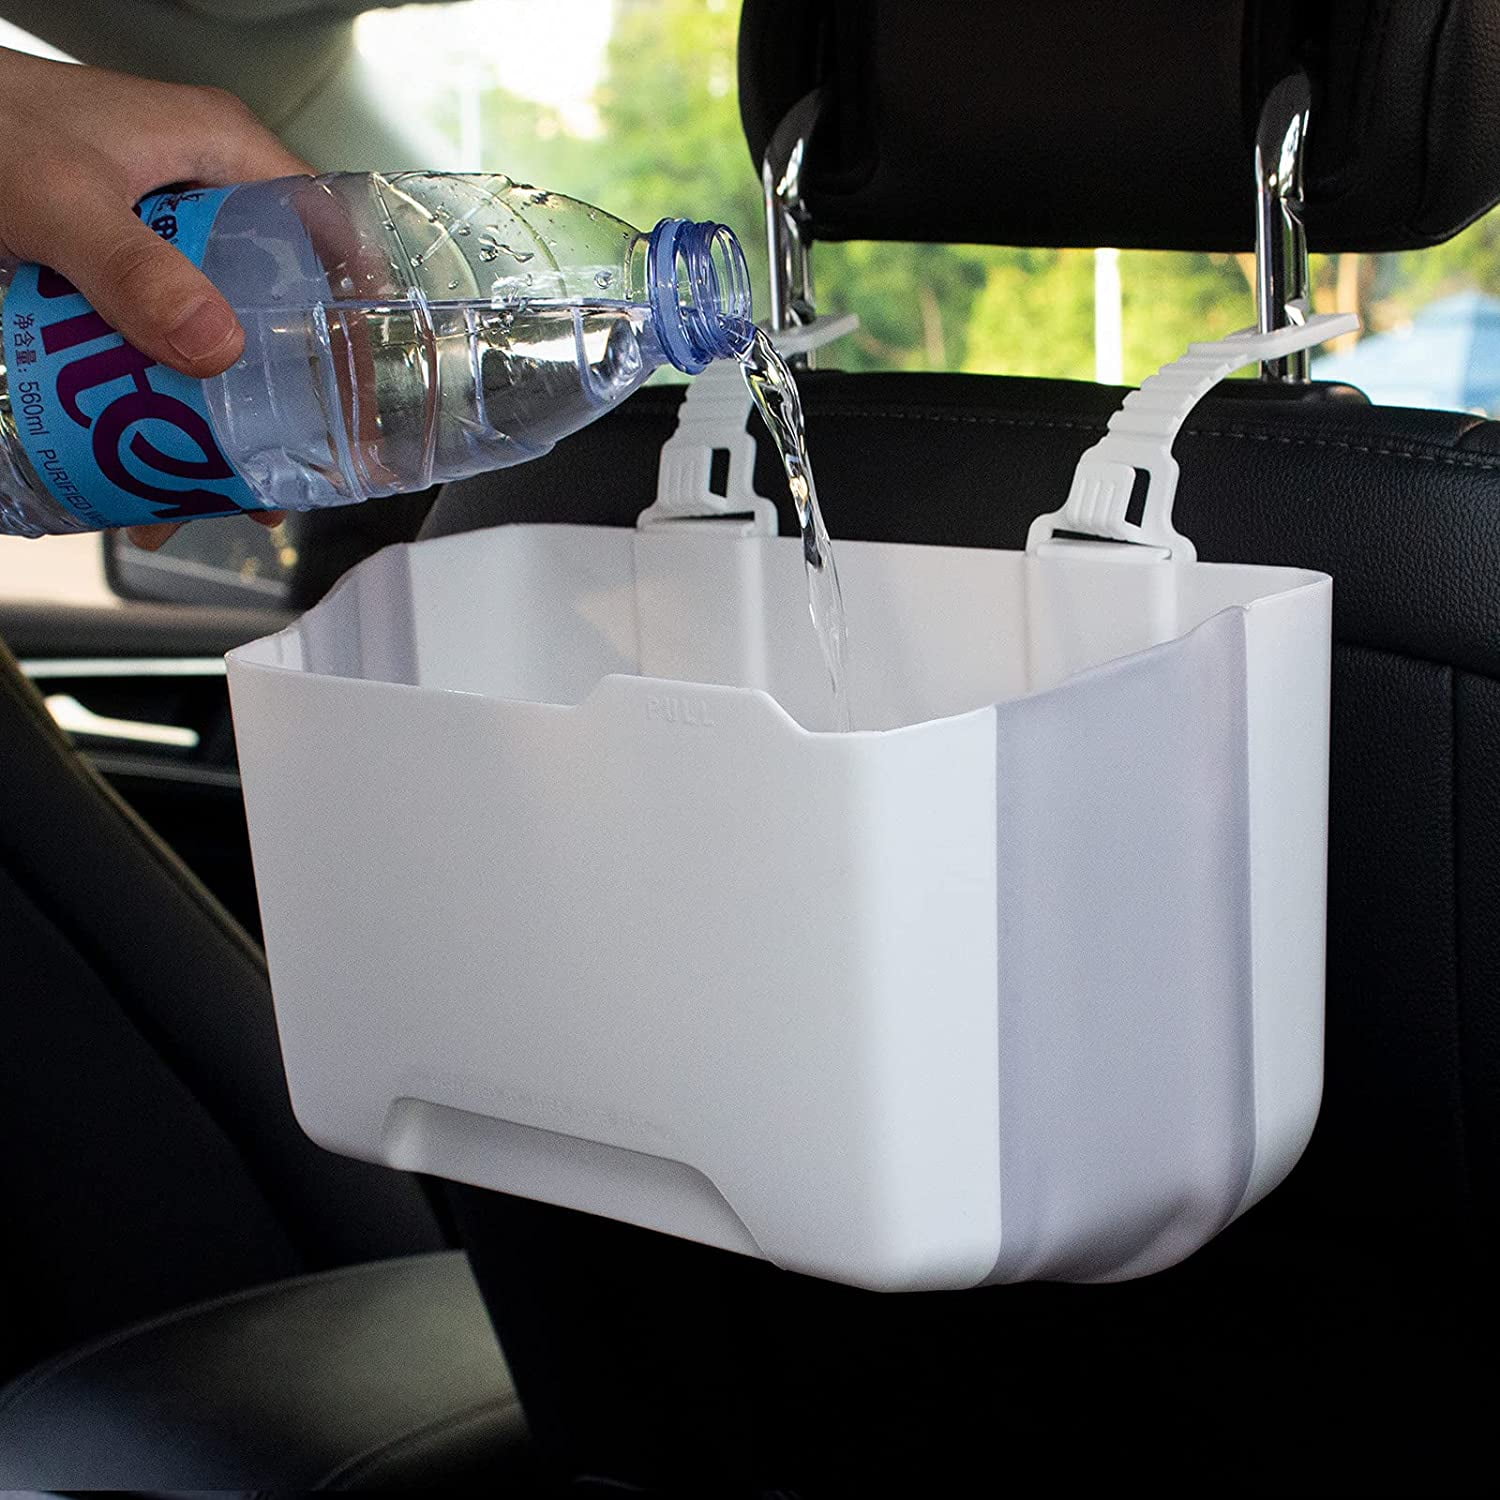 Car Rubbish Bin Car Trash Can Litter Container Leak Proof Collapsible Garbage Organiser Kitchen Office Car Small Storage Box for Car SUV Truck 